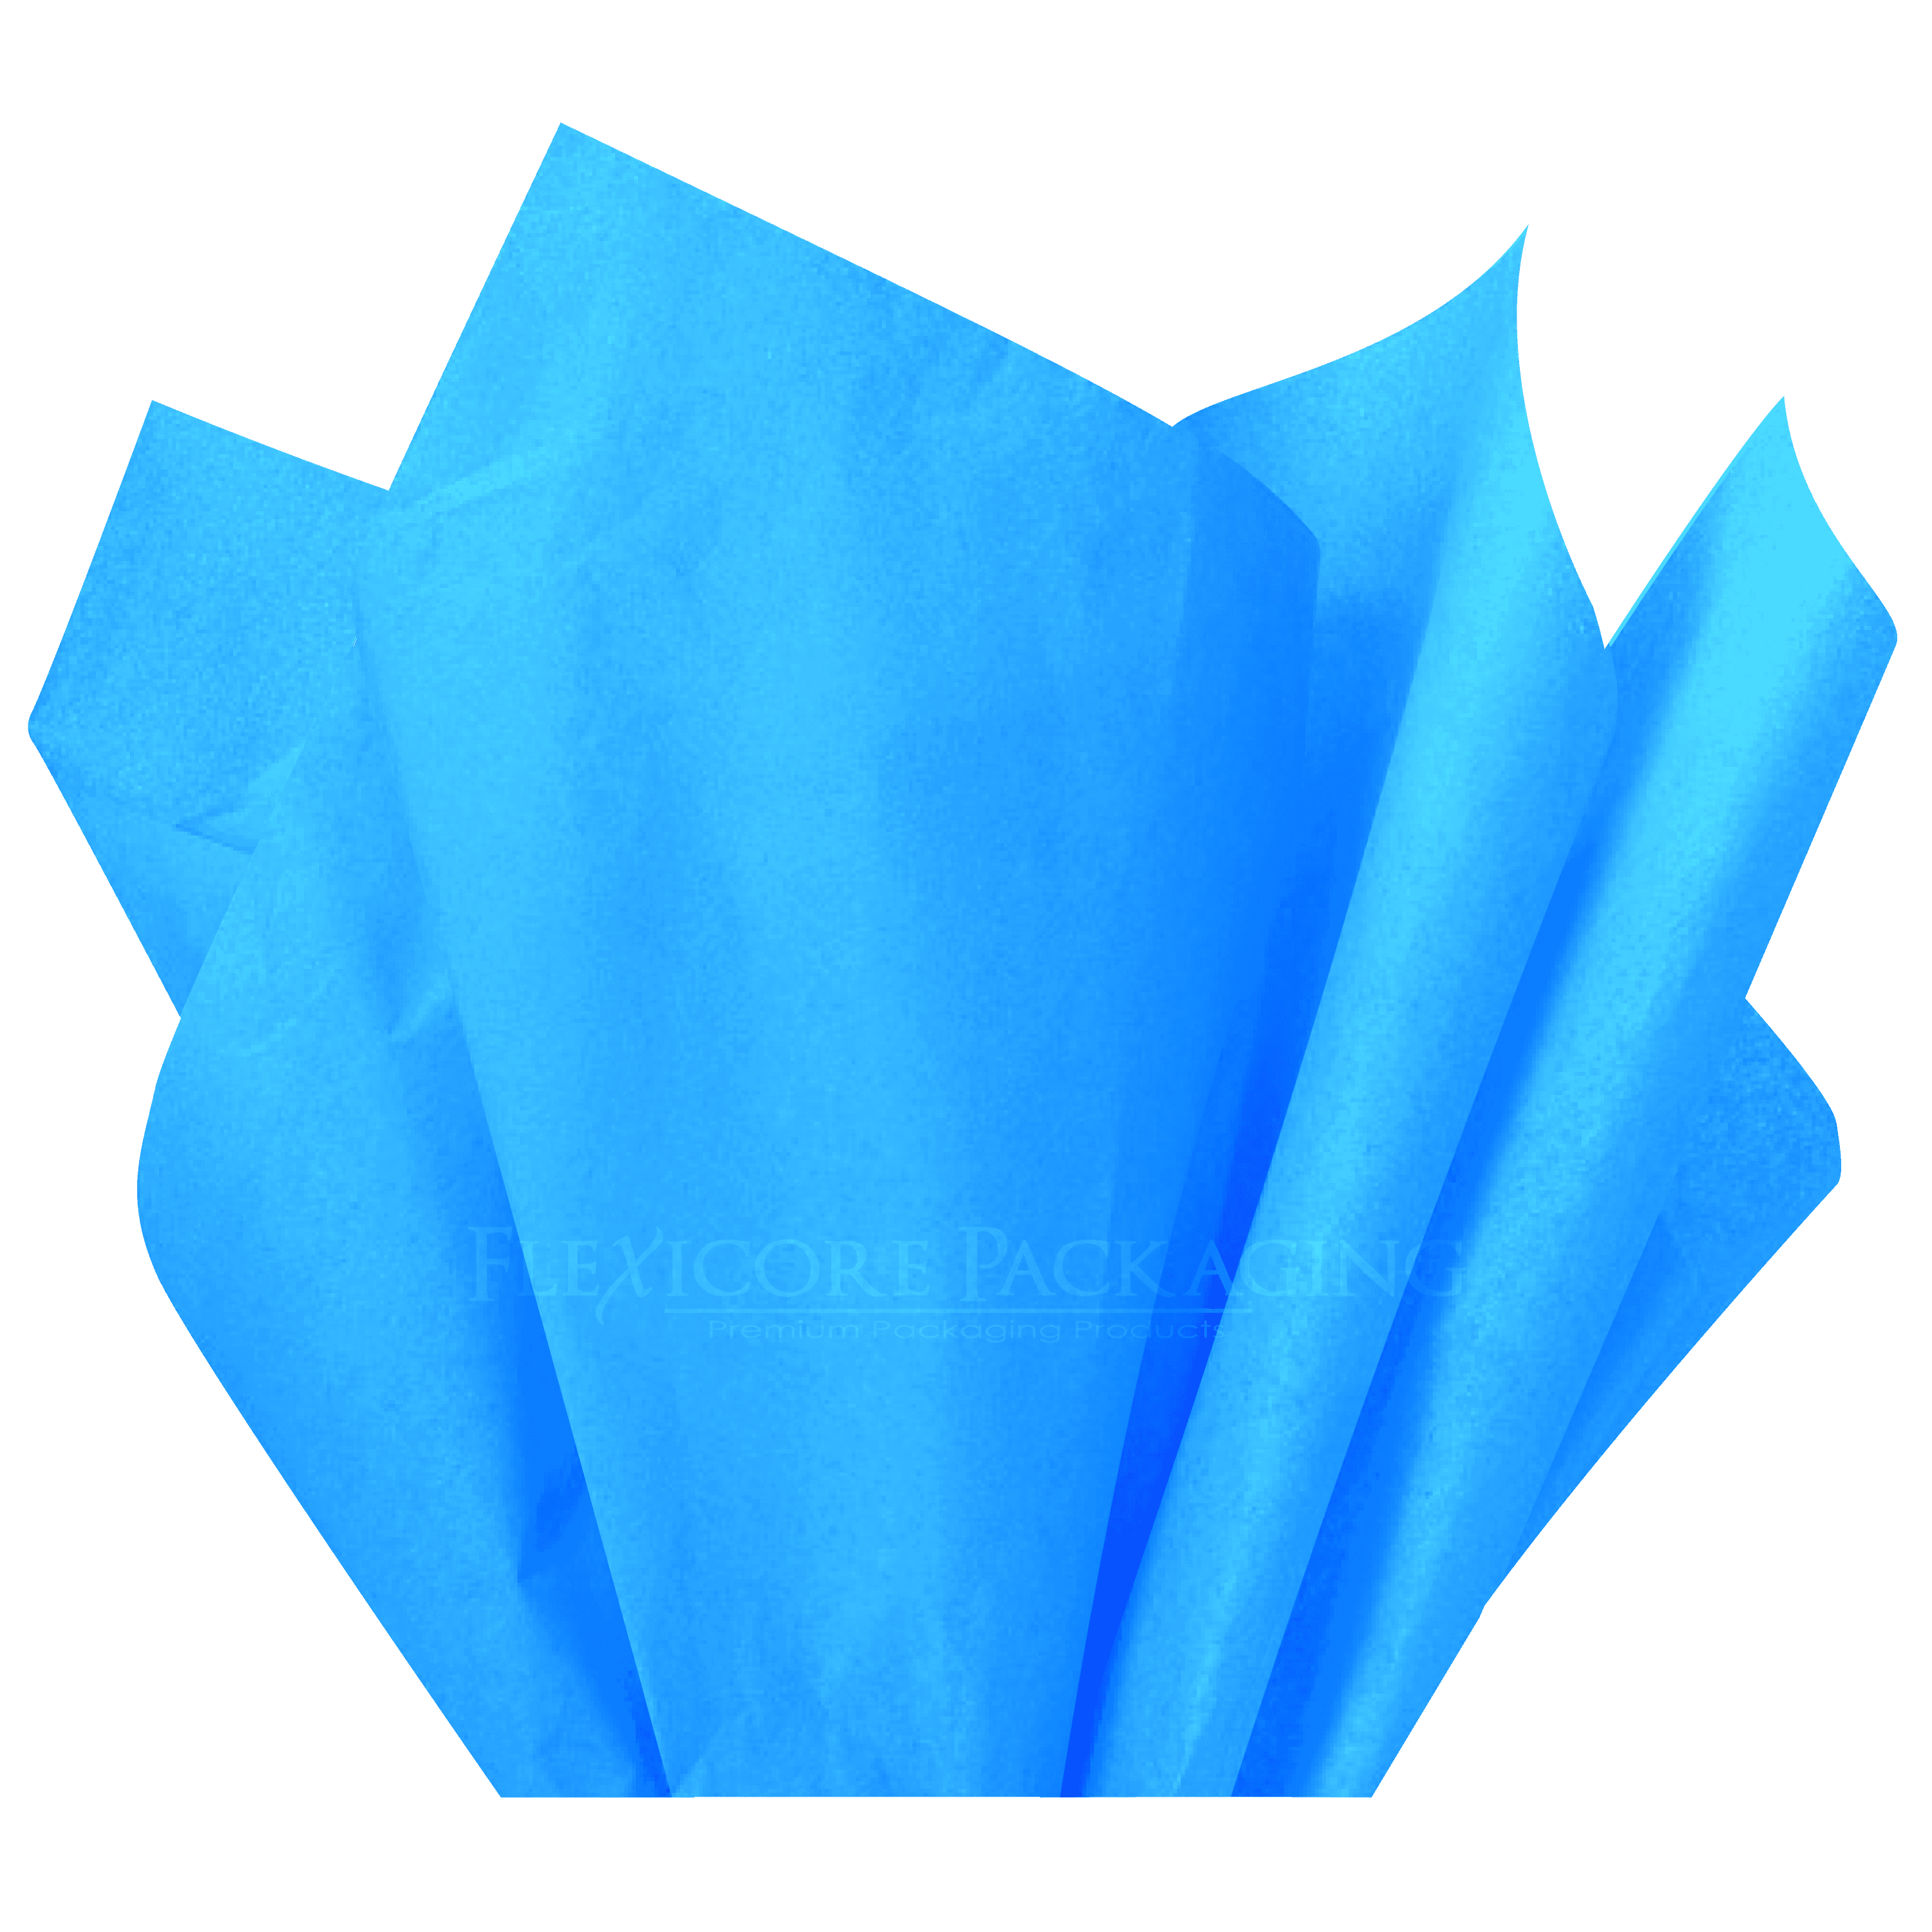 35x45cm 18gsm Acid Free Light Blue Tissue Paper Wrapping Sheets 